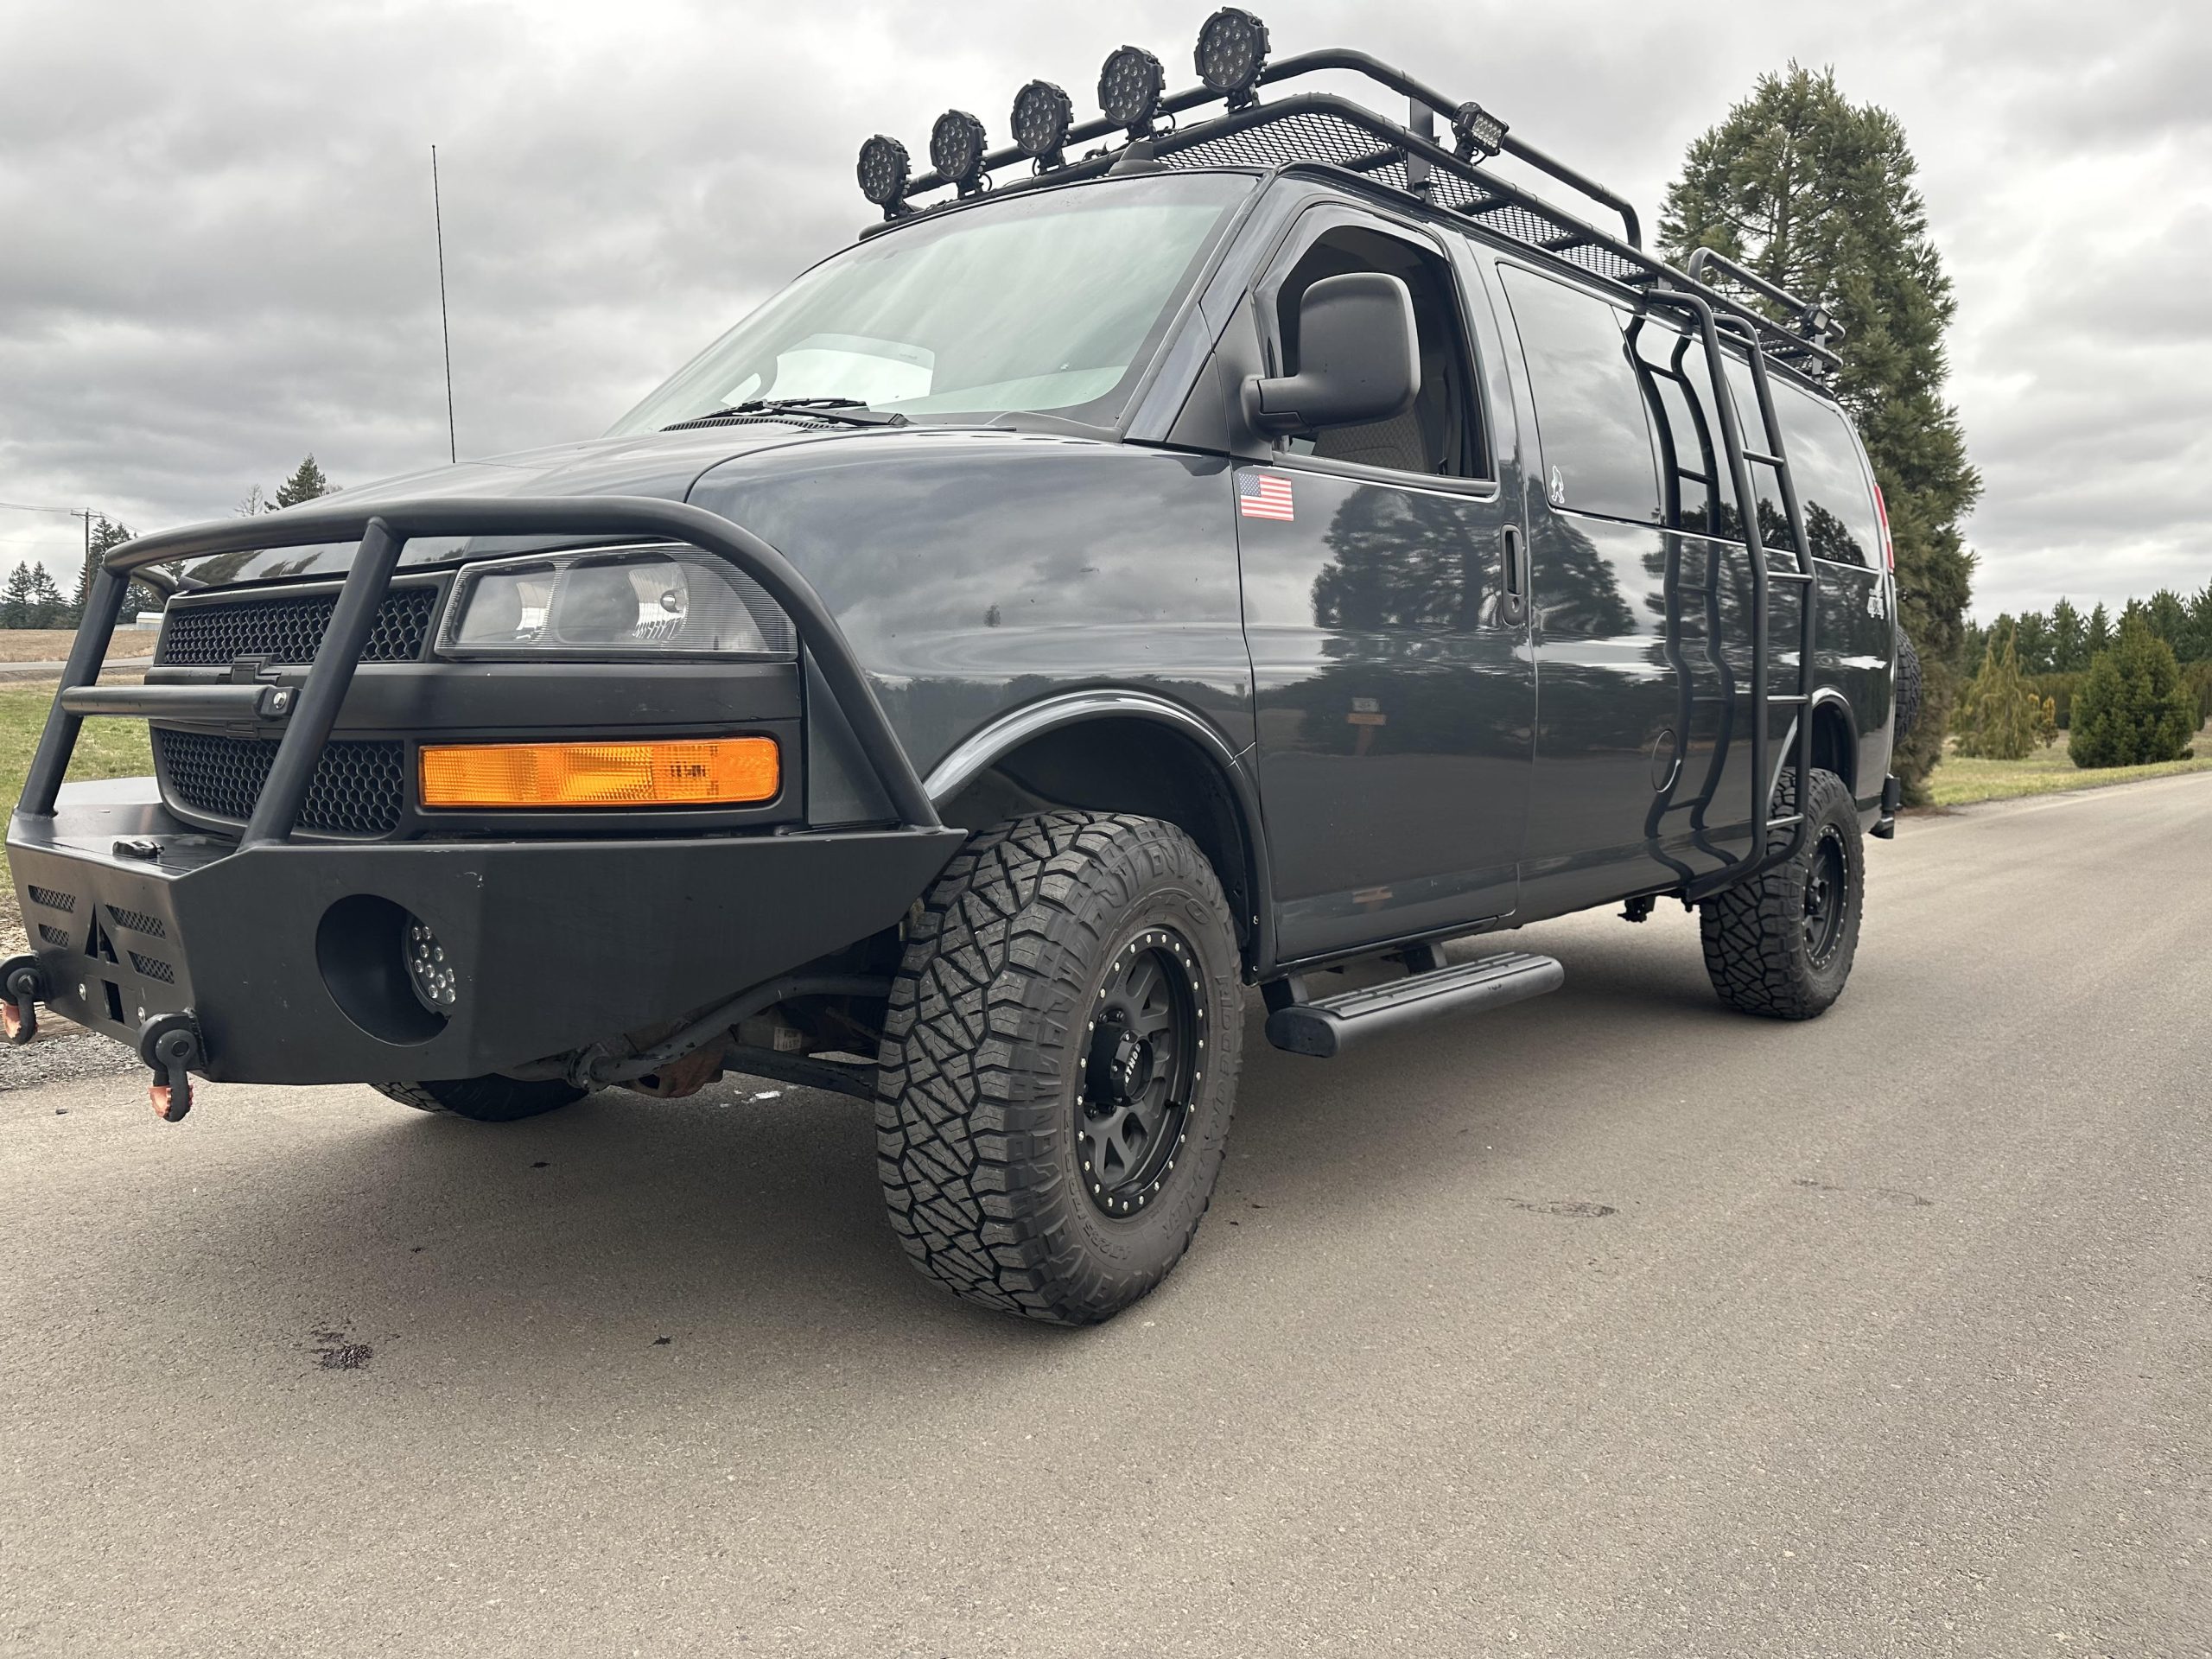 Overland Classifieds :: 2017 Chevrolet Express Quigley 4x4 - Expedition  Portal